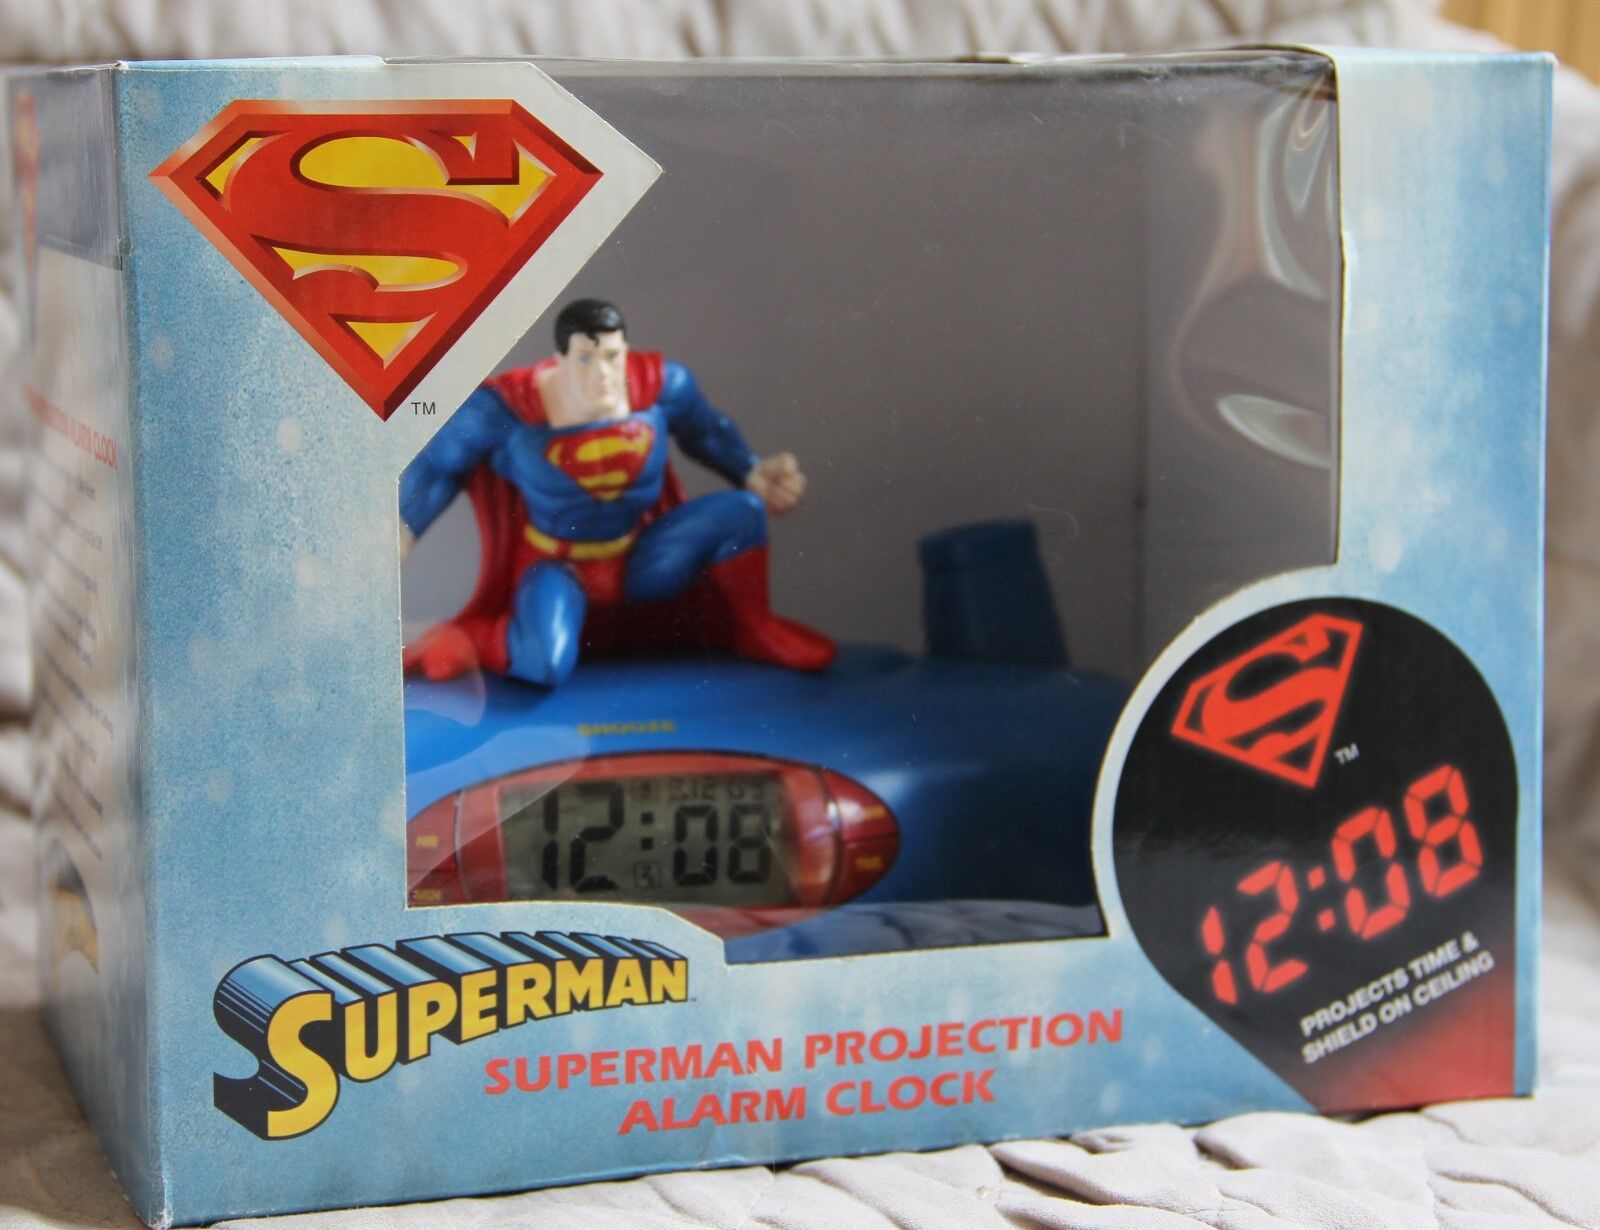 Superman Projection Alarm Clock - New, Hard to Find in this condition